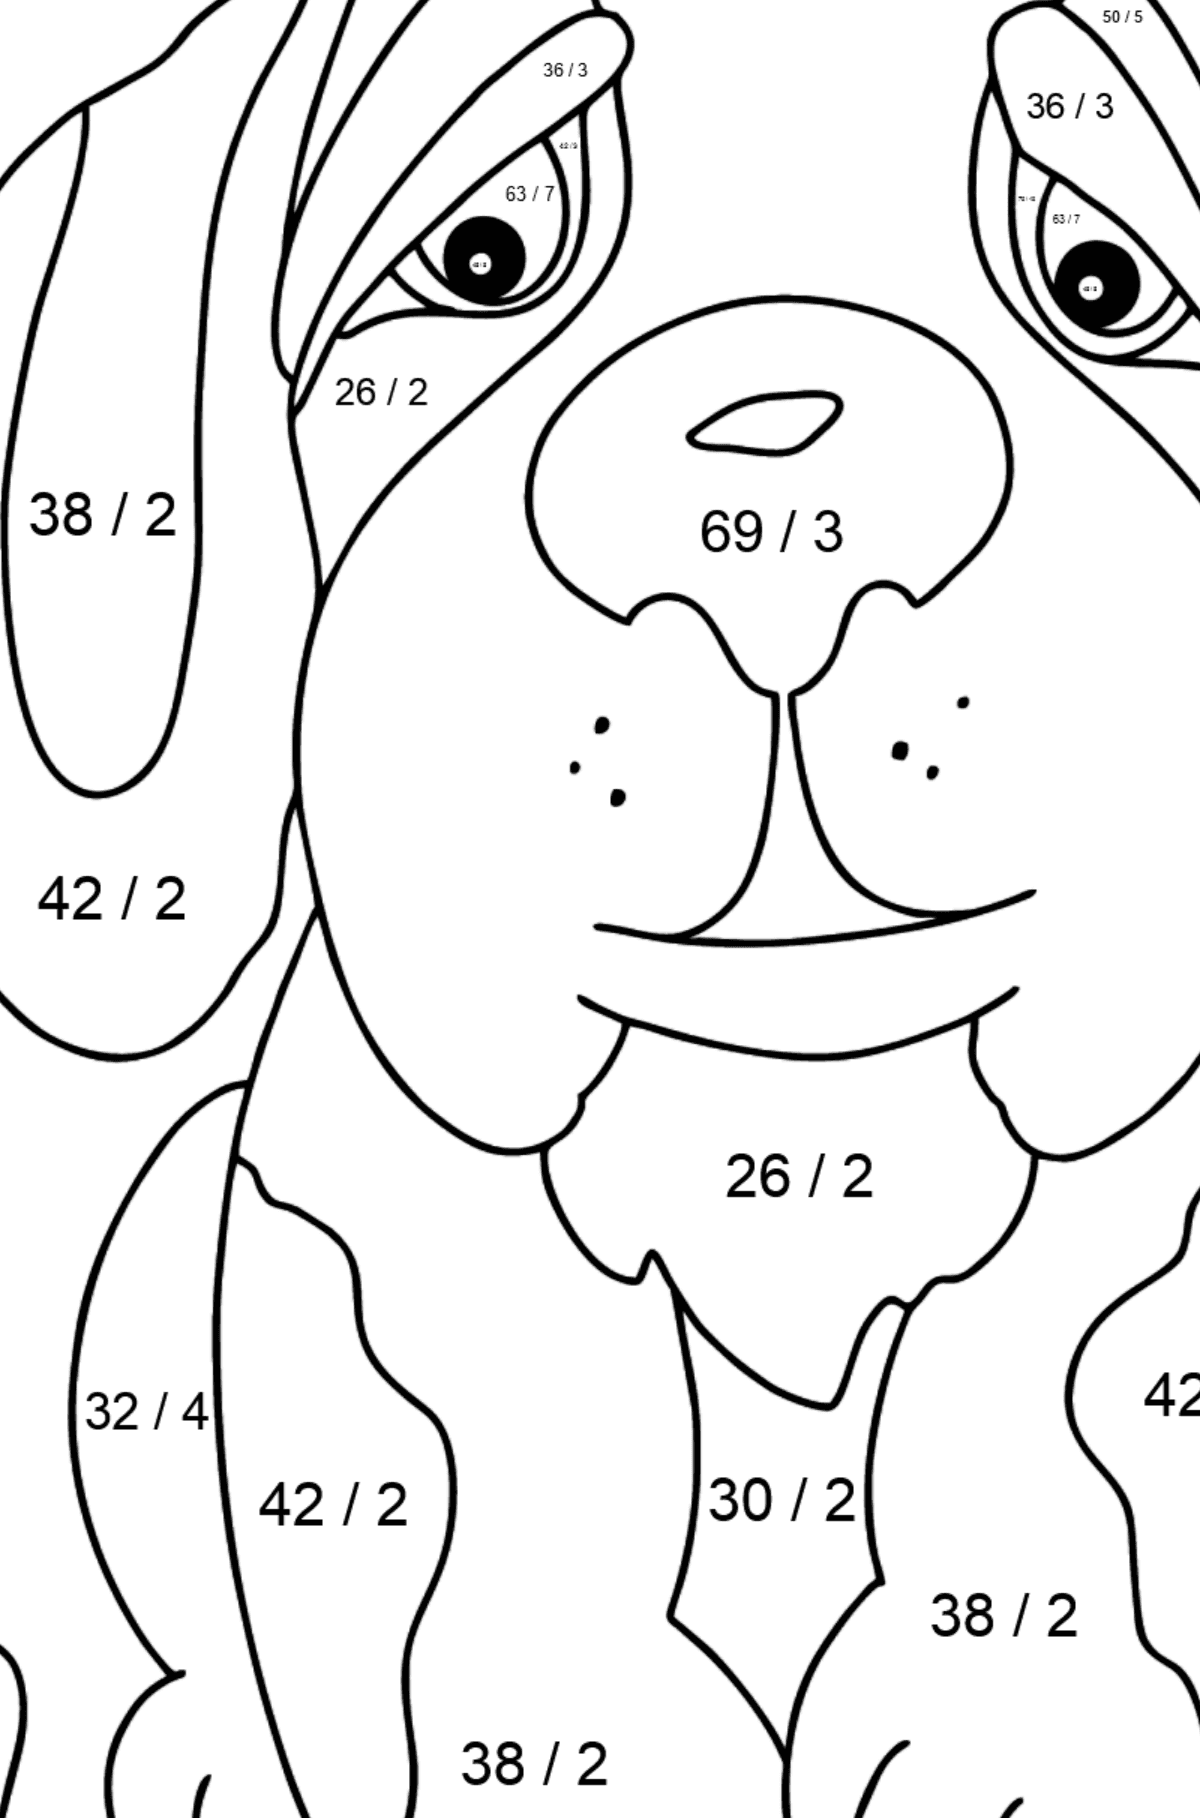 Coloring Page - A Dog is Watching a Butterfly - Math Coloring - Division for Kids